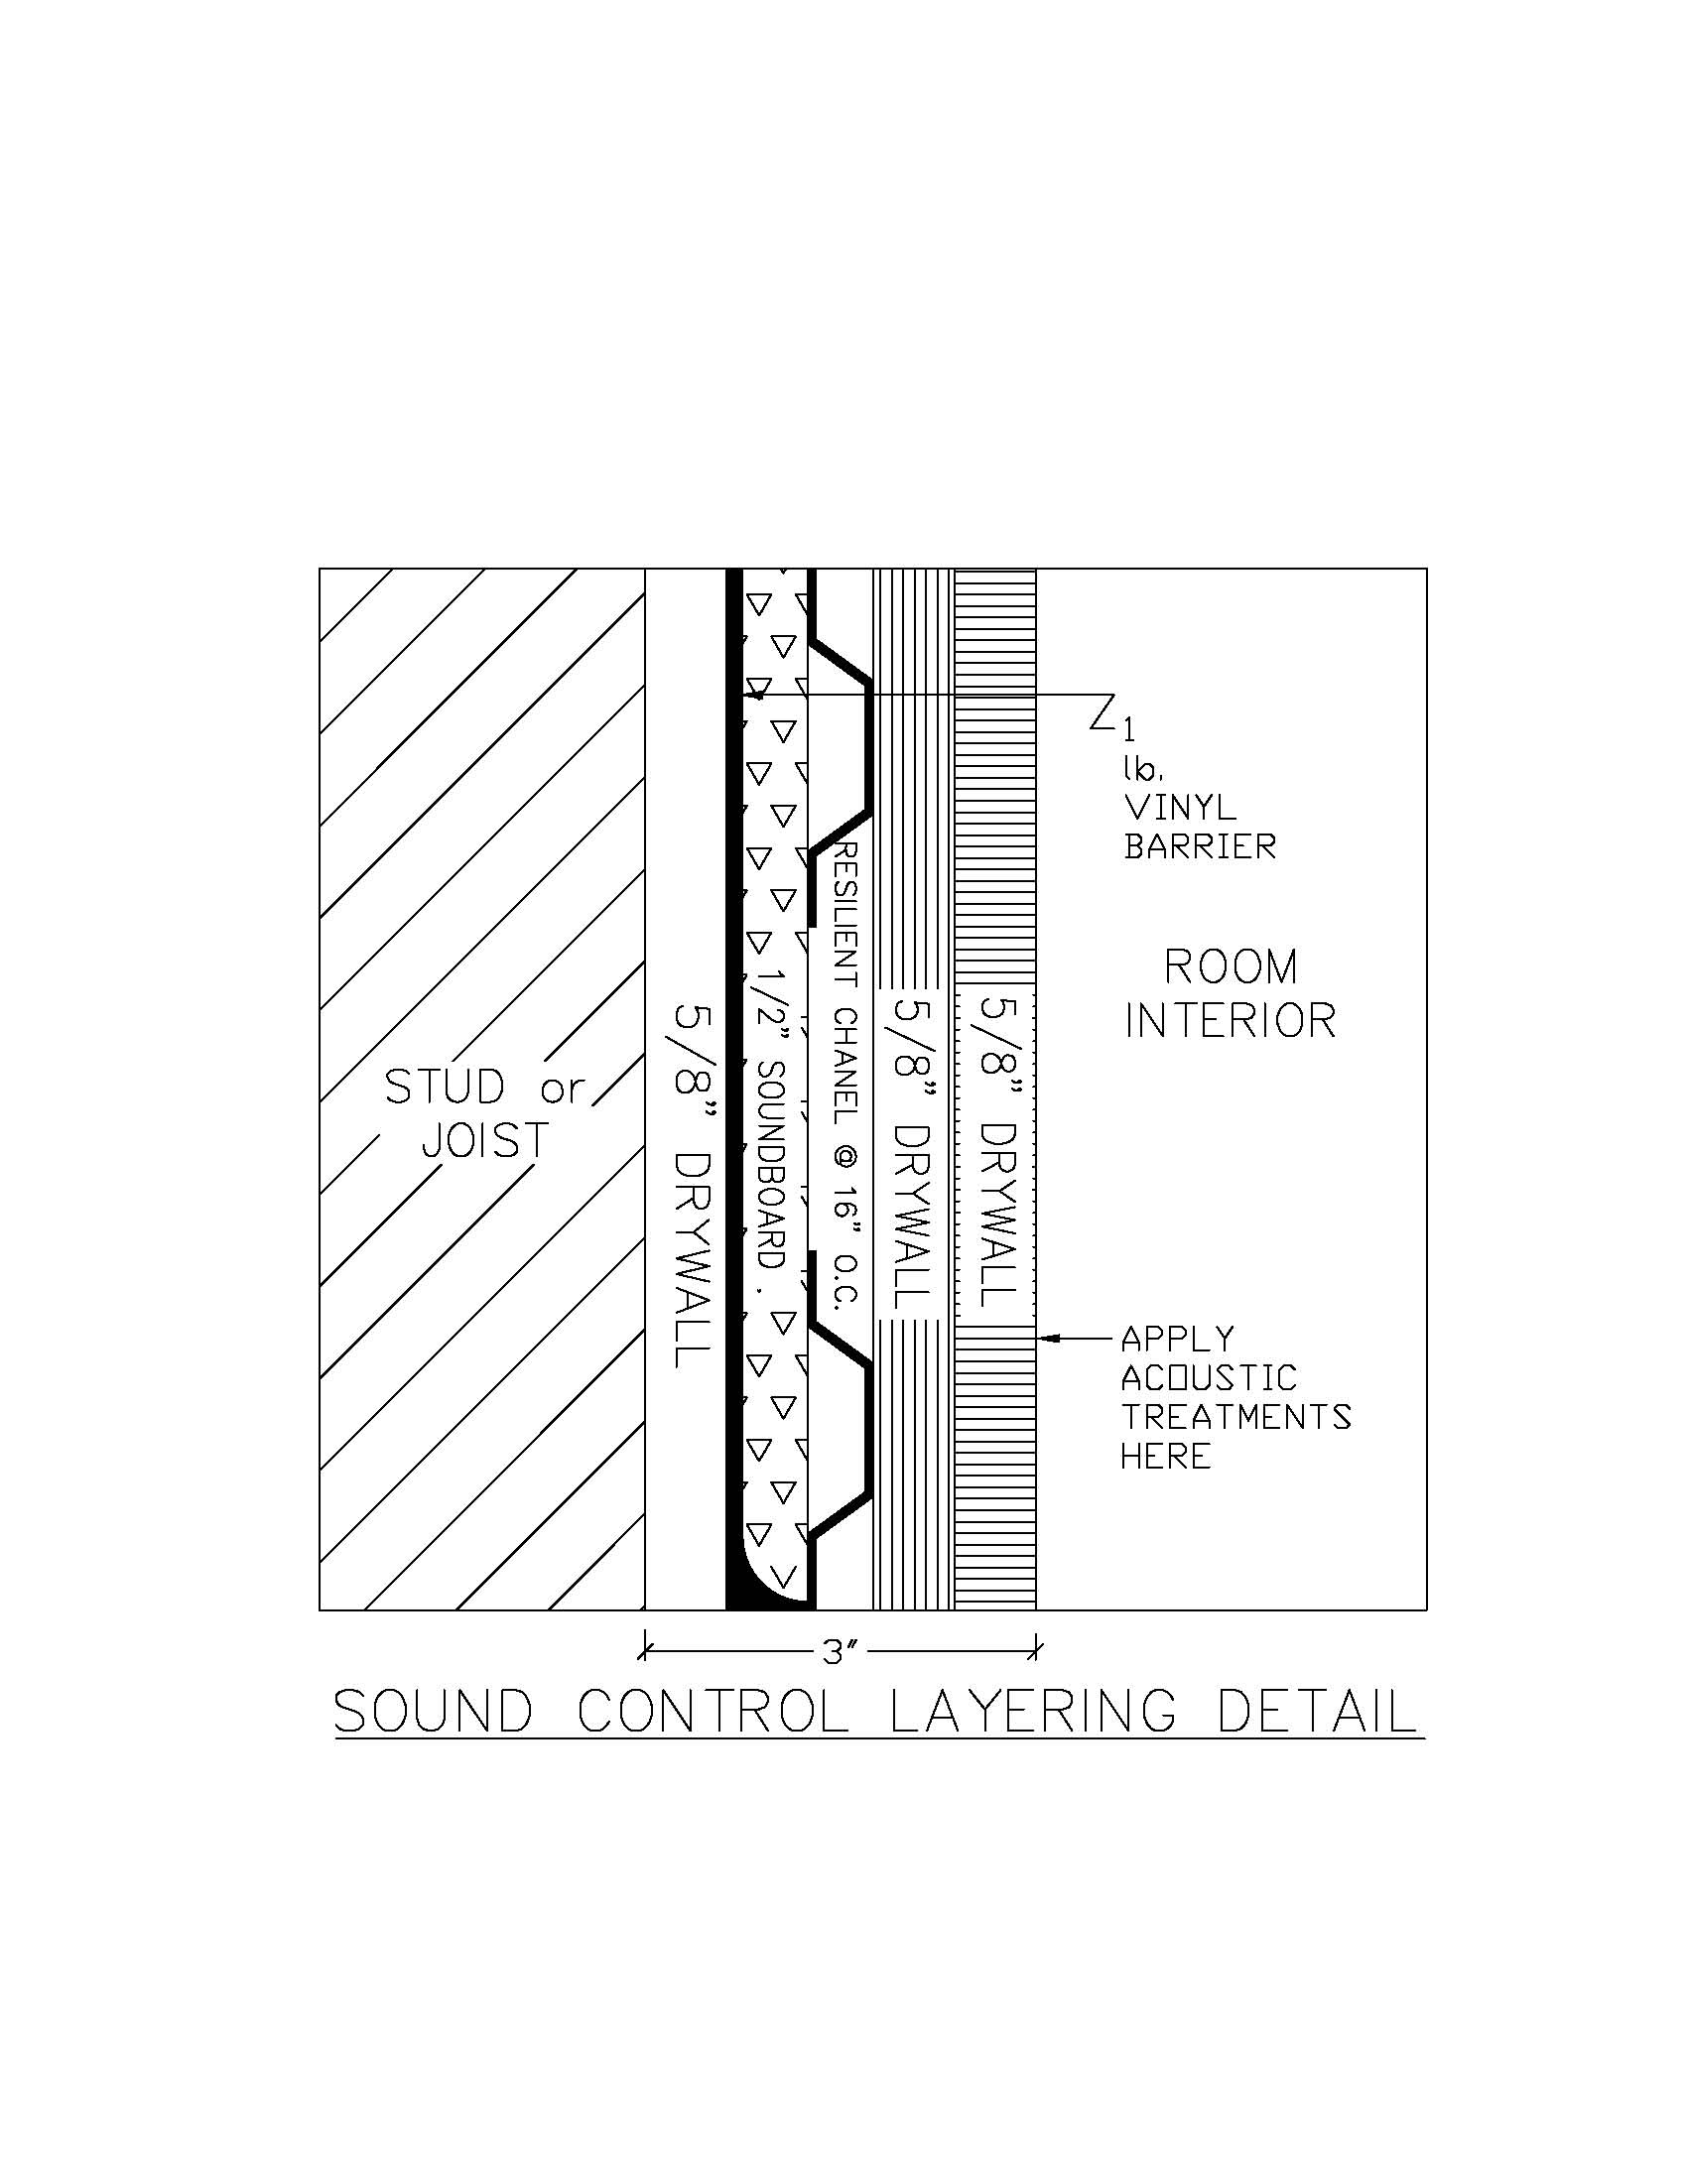 Sound Control Layering Detail